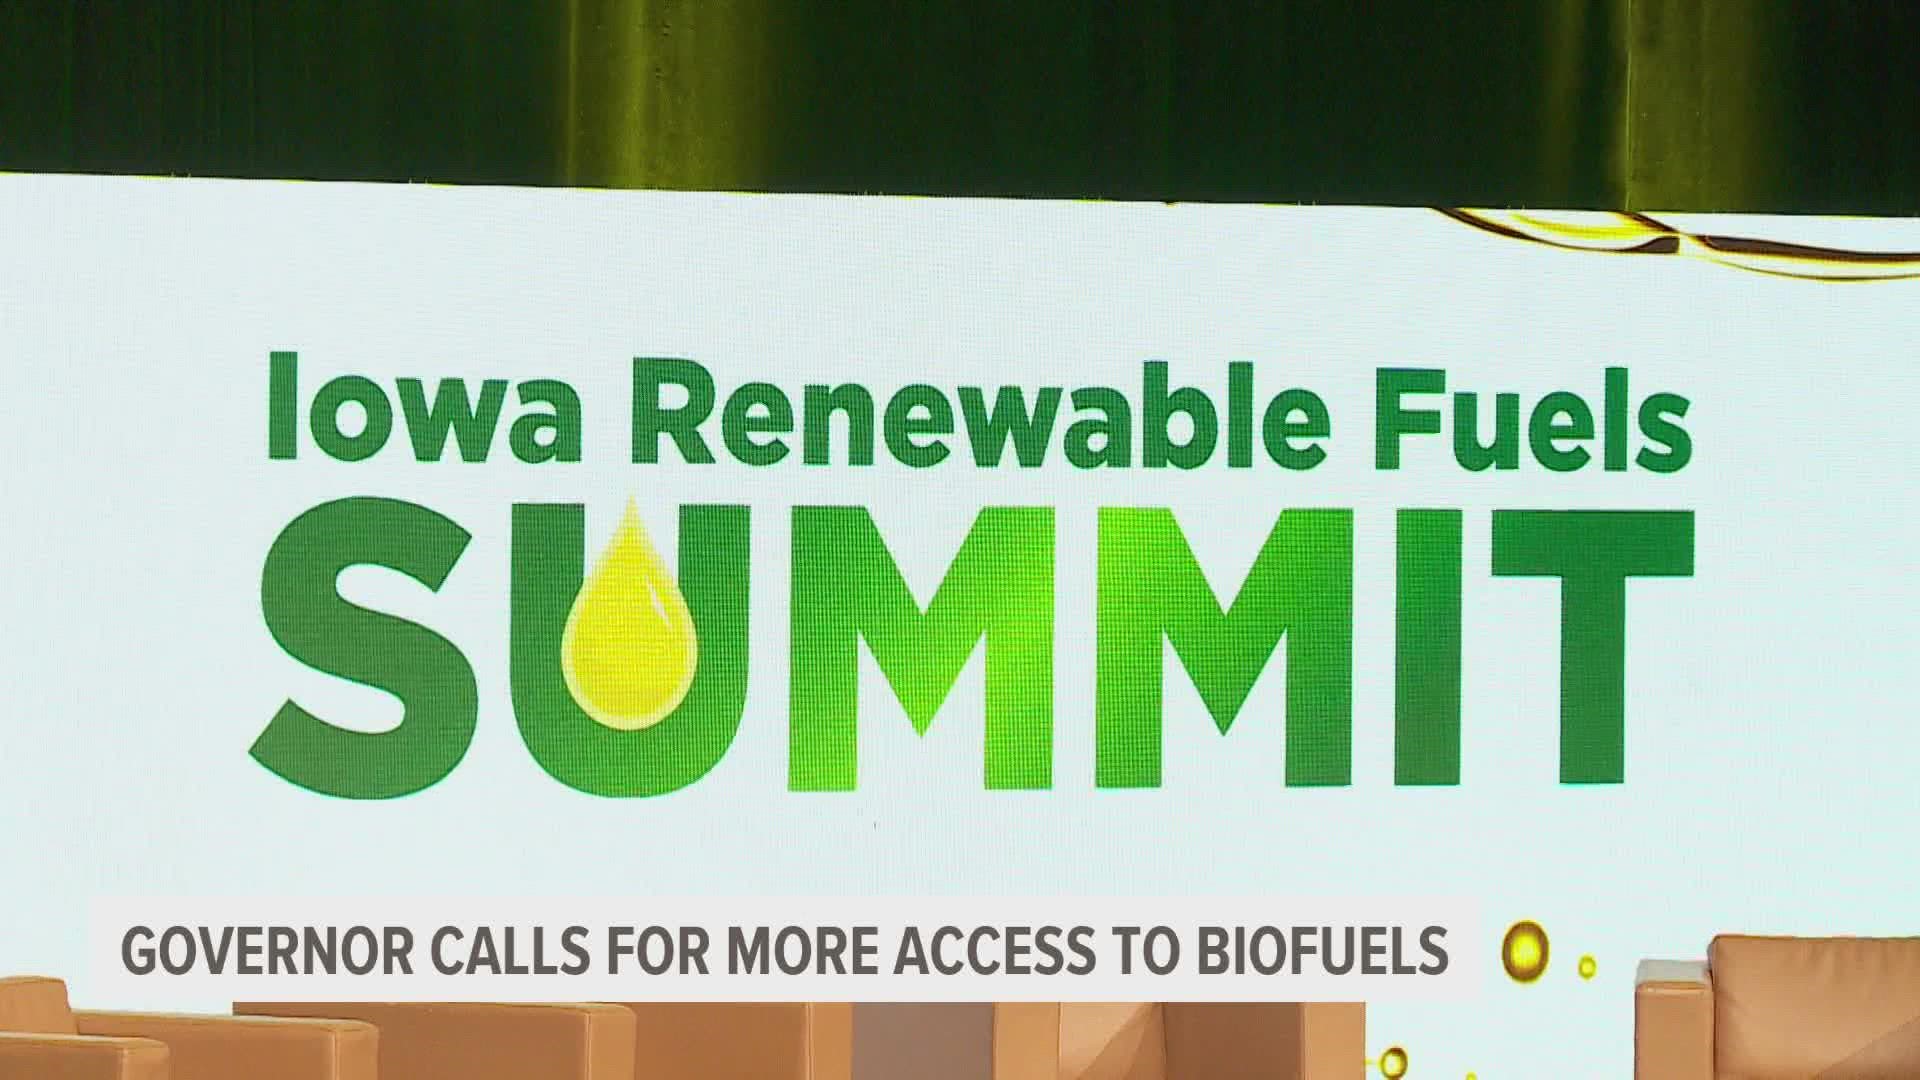 Iowa Gov. Kim Reynolds criticized the Biden administration's approach to biofuels at the Iowa Renewable Fuels Summit Tuesday.